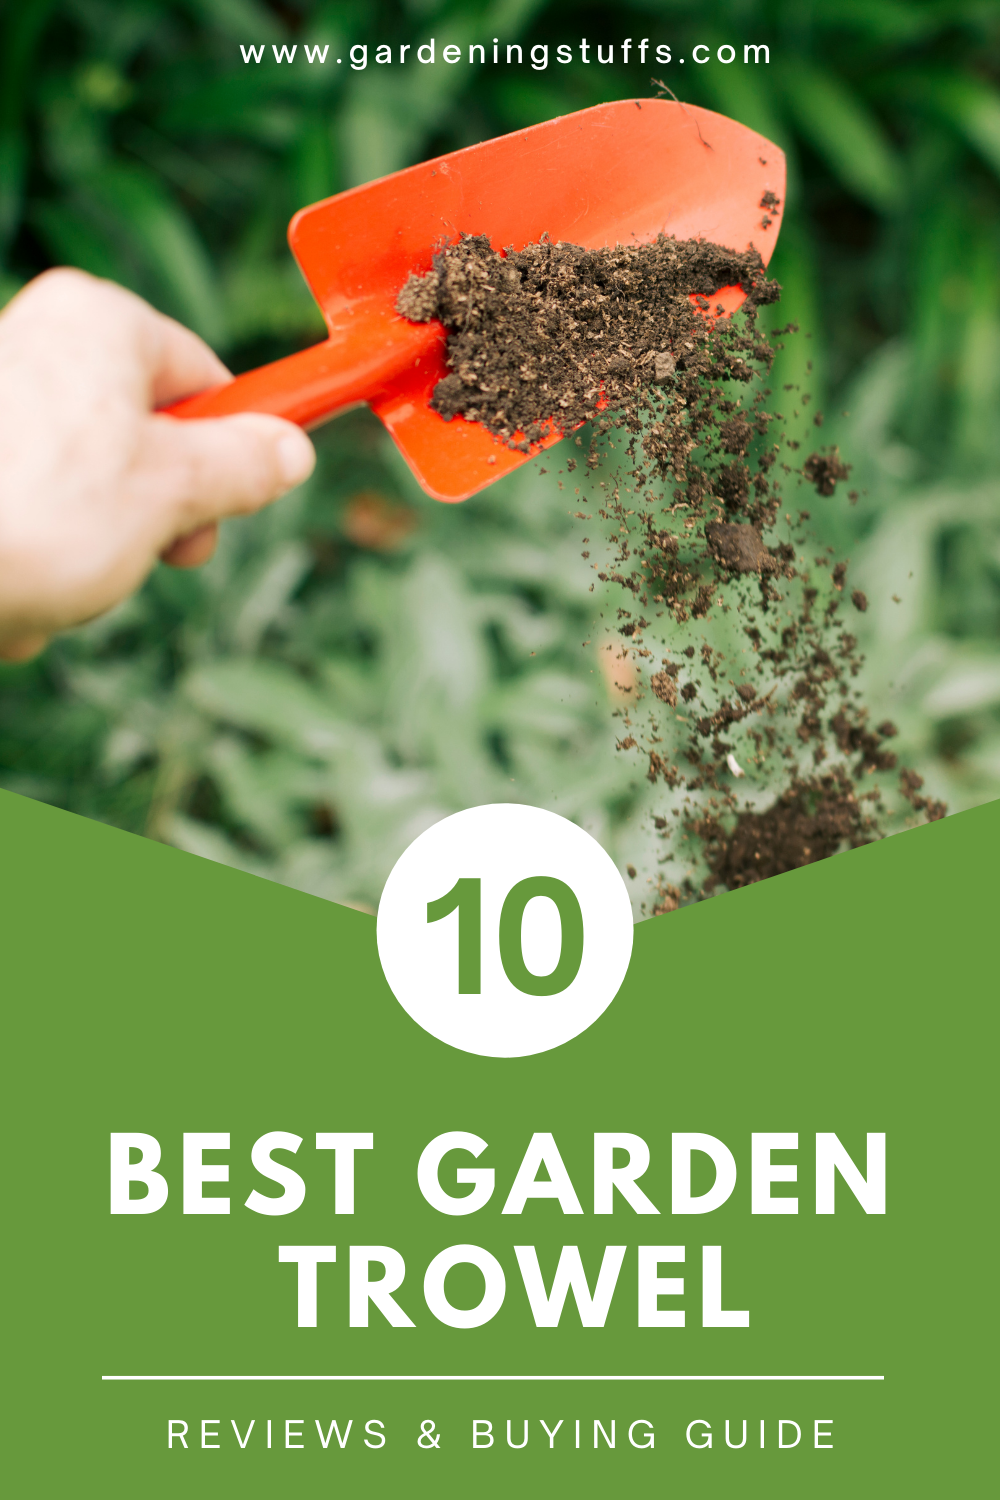 If you are searching for a gardening trowel online you could find more than a 100 models that come from different brands with different features. Read on this guide on how to select the best gardening trowel and we provide the list of 10 best garden trowels available on the market right now.